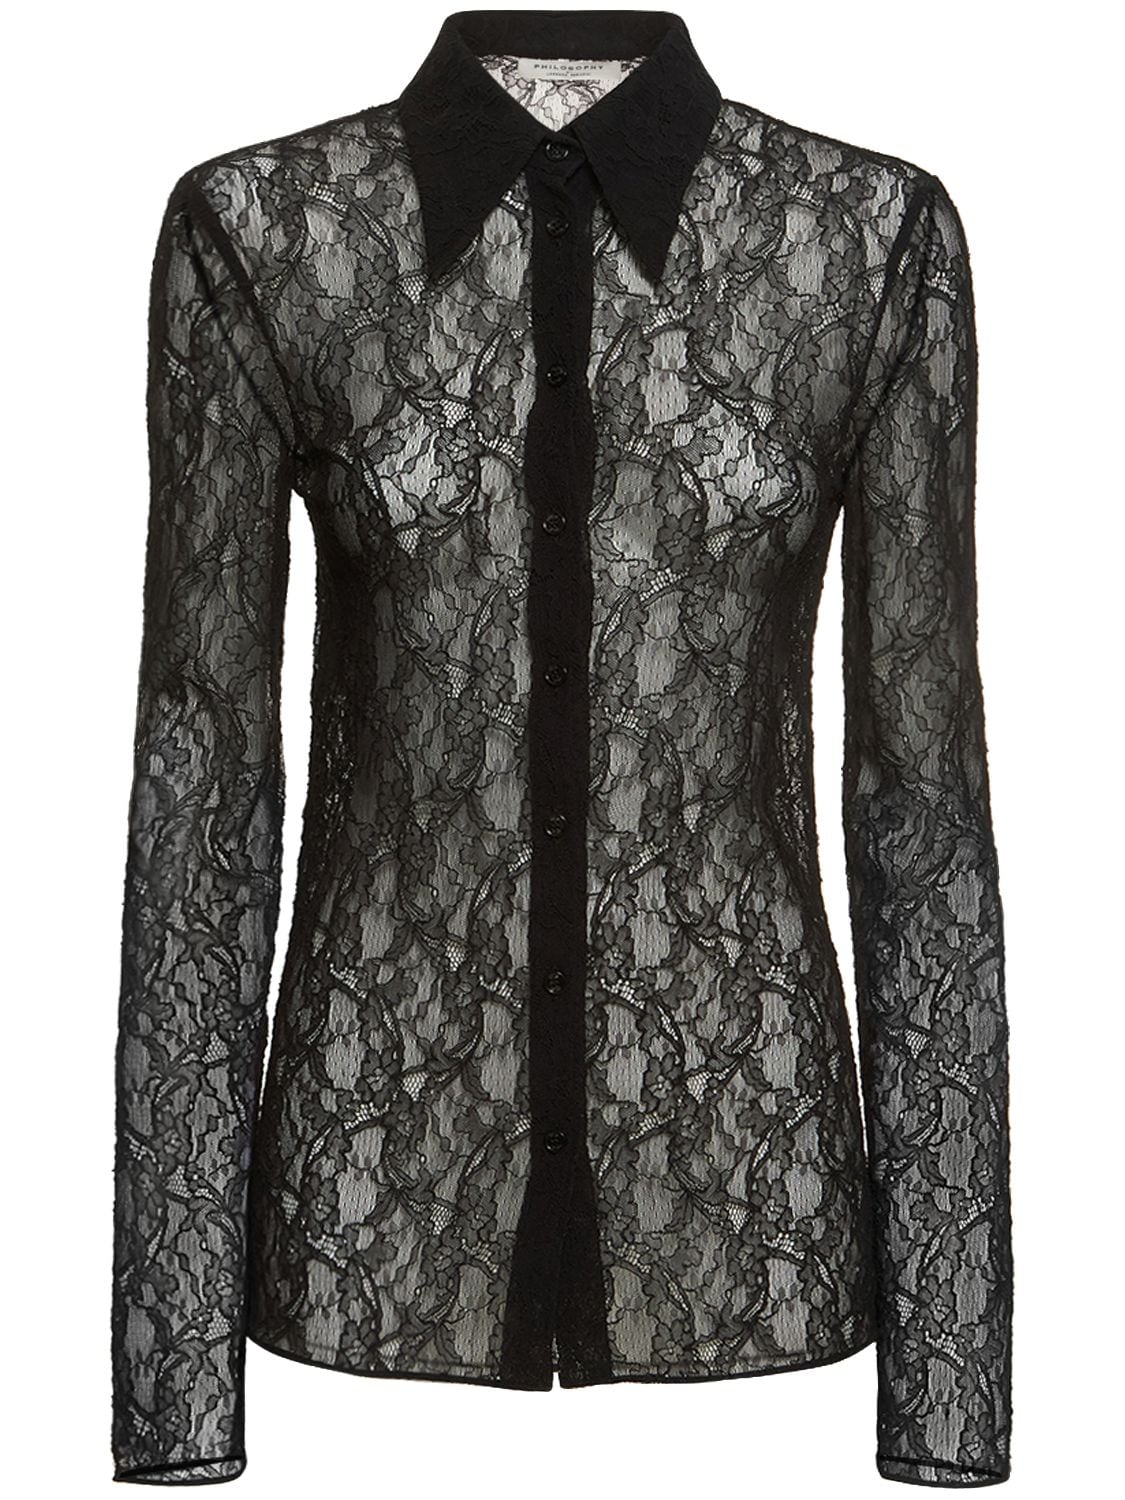 Image of Stretch Lace Shirt